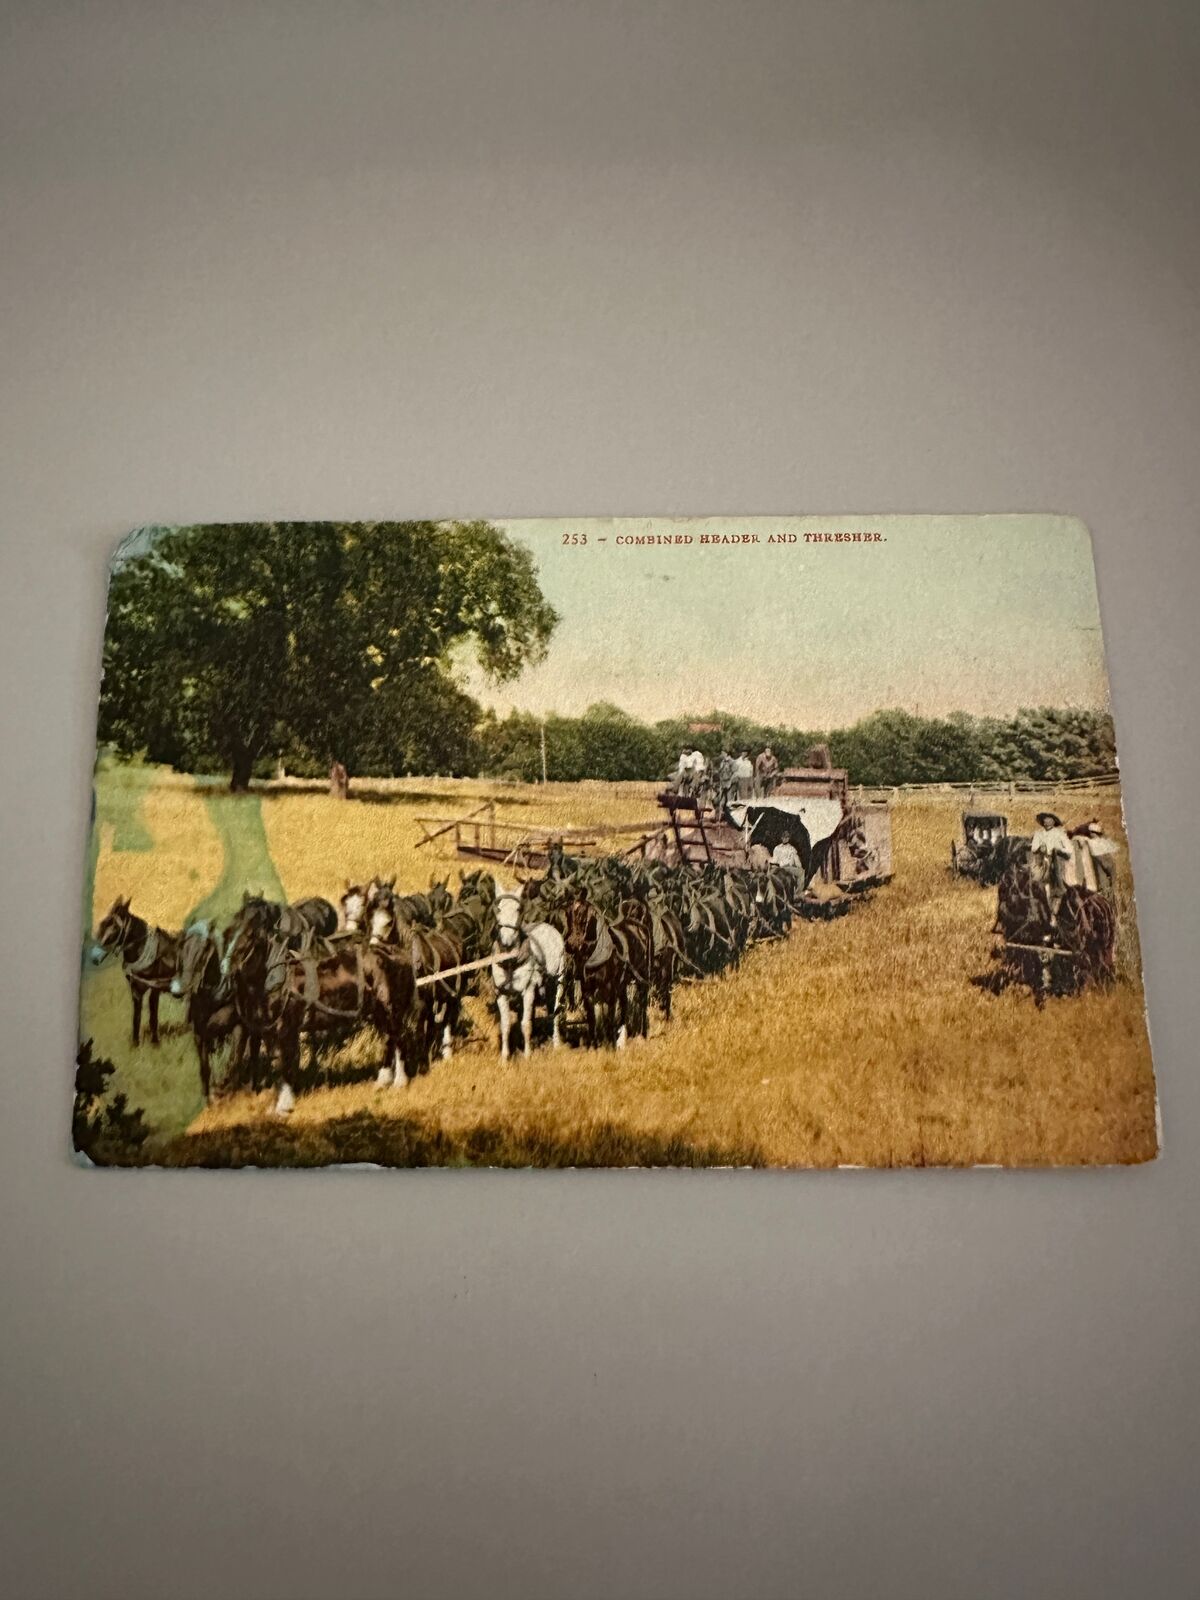 Antique Early 1900’s Postcard - 253 Combined Header and Thresher